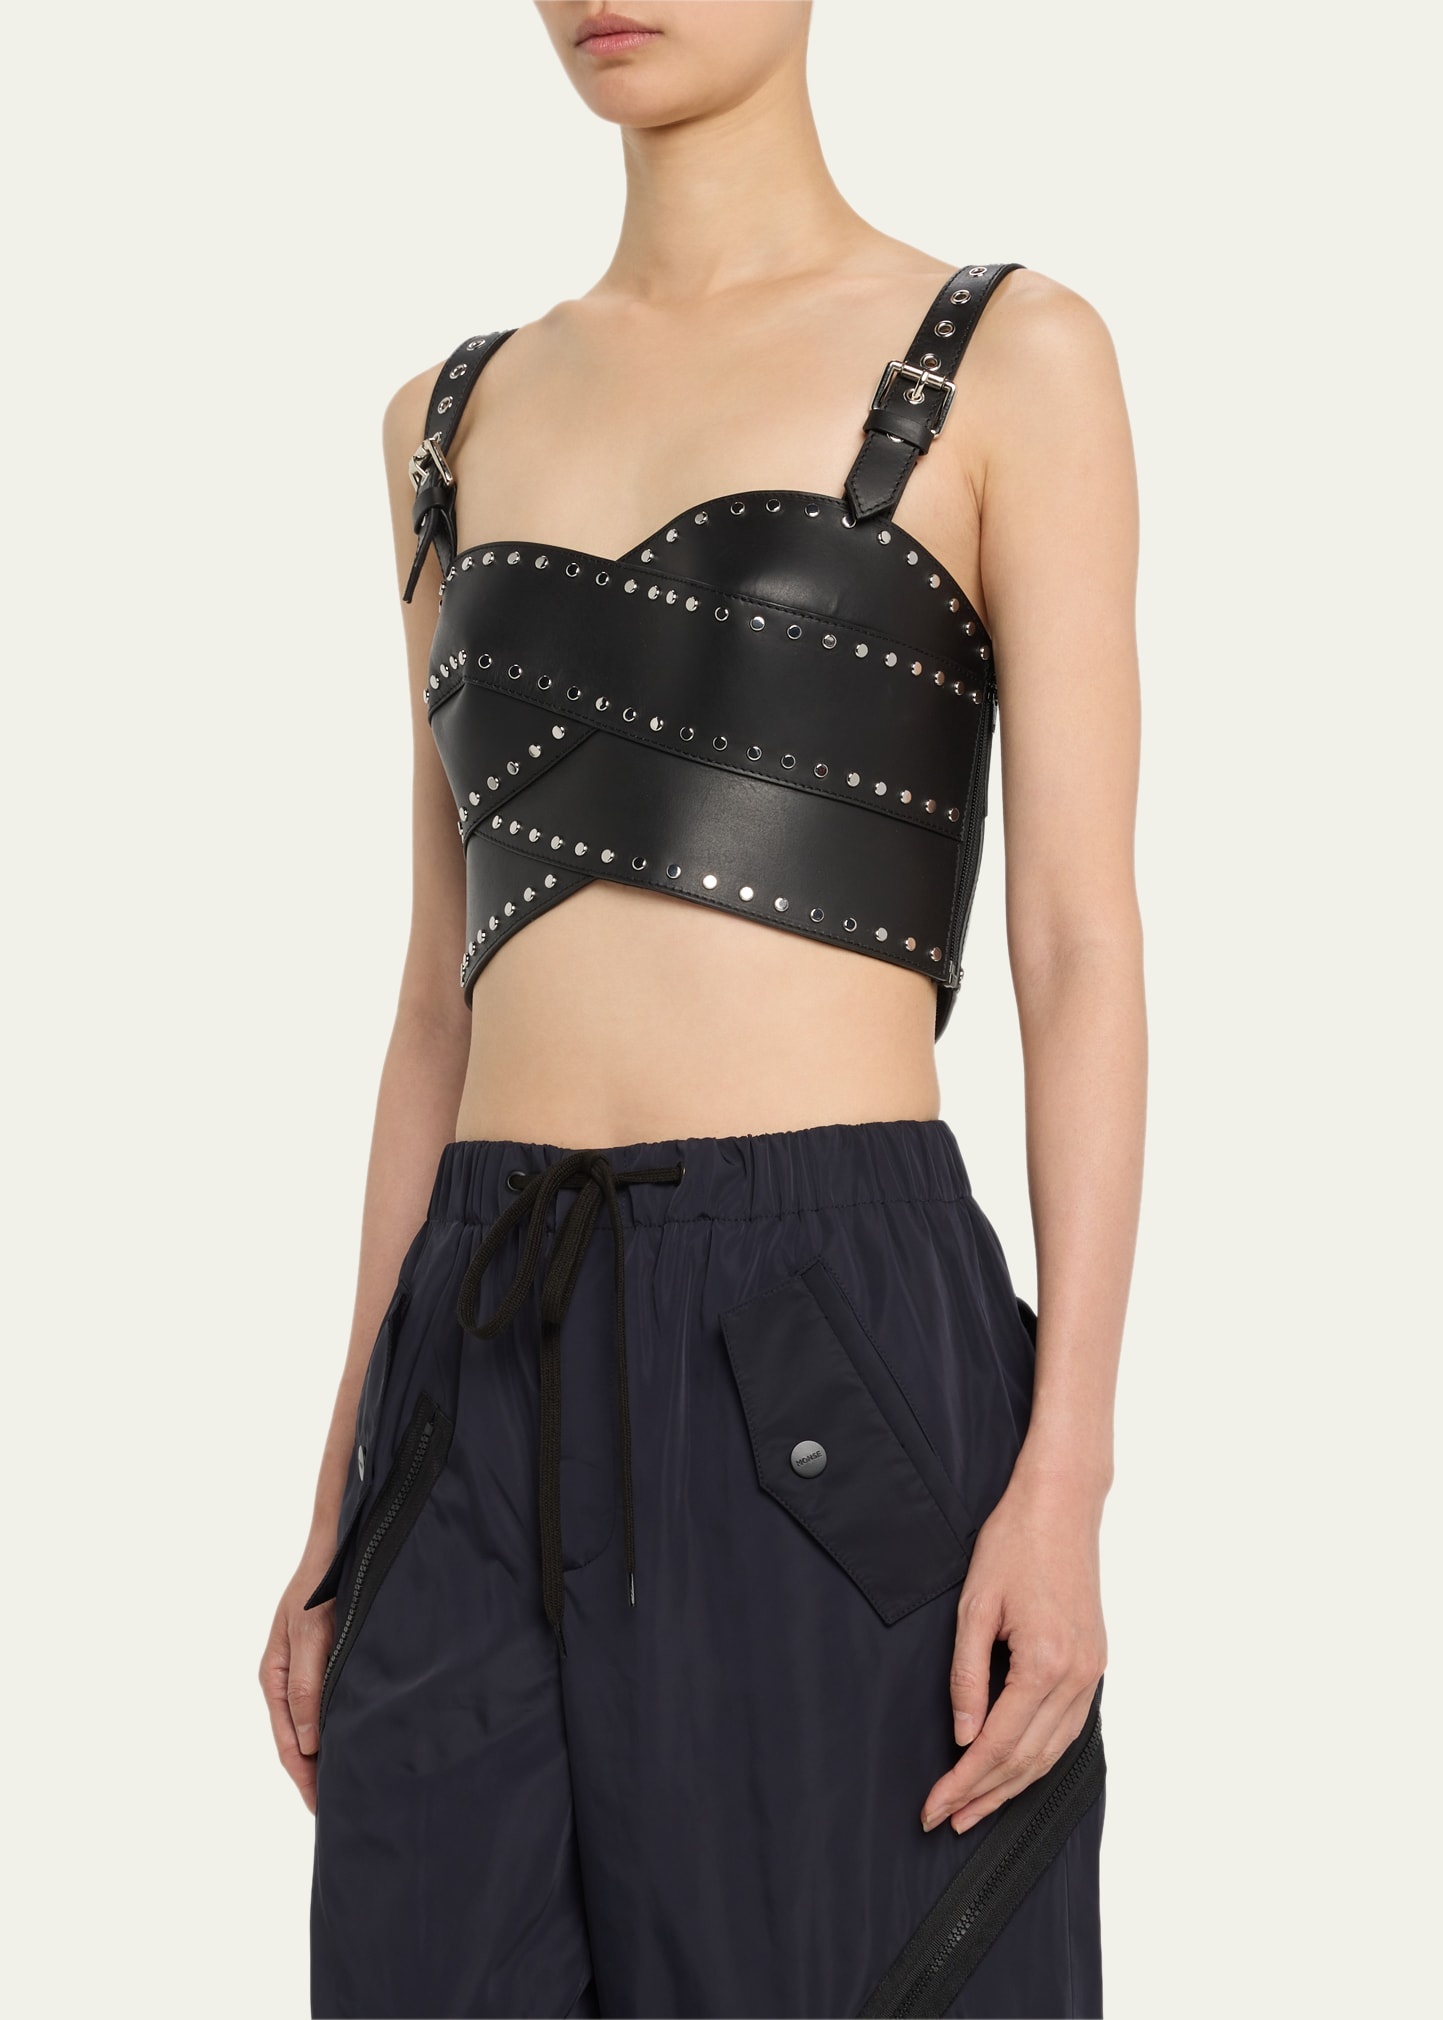 Leather Studded Bustier Top - 4